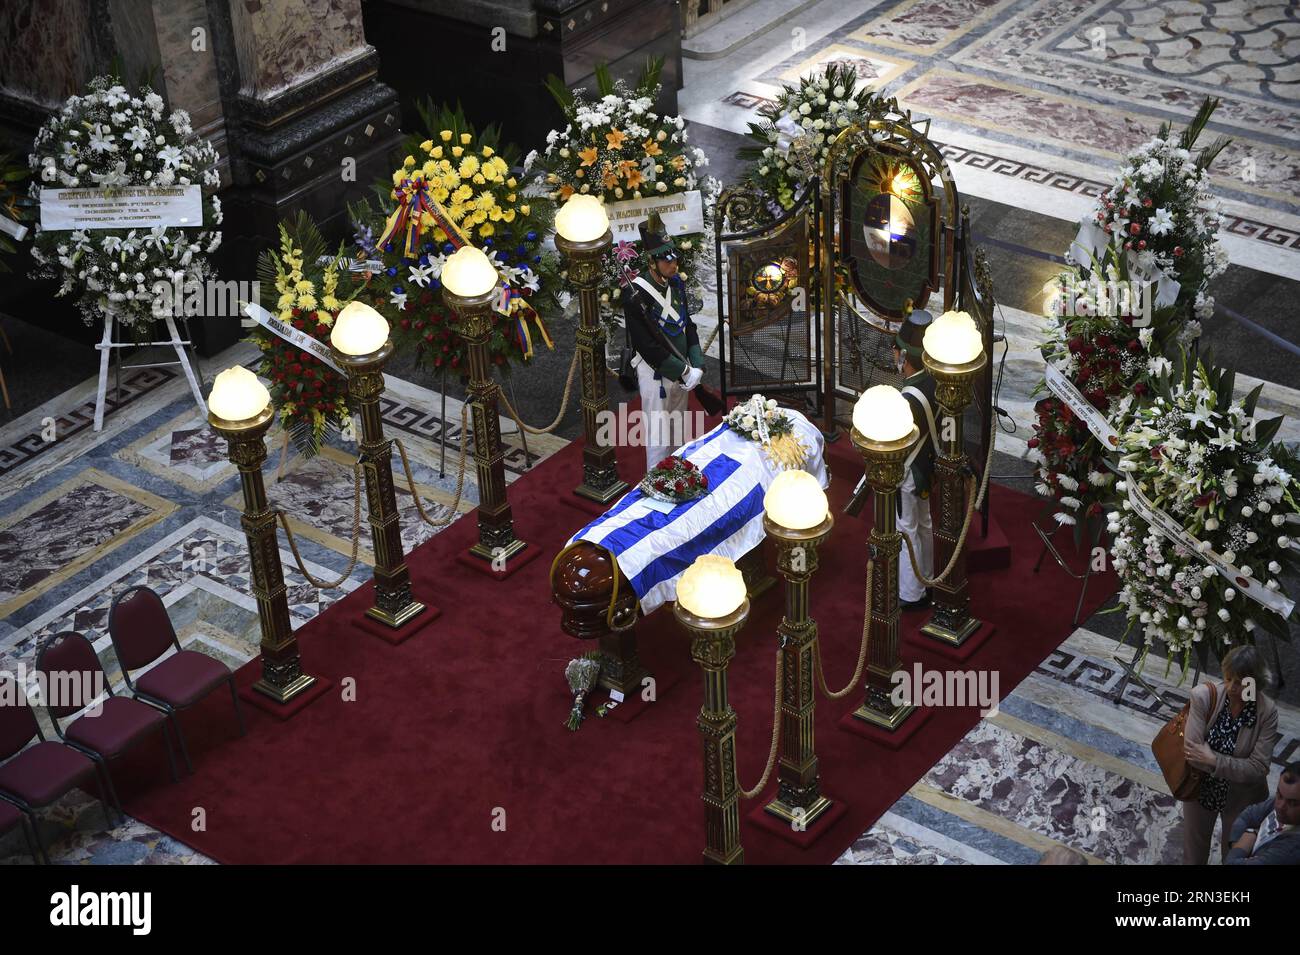 (150414) -- MONTEVIDEO, April 14, 2015 -- Members of an honor guard watch over the coffin of Uruguayan writer Eduardo Galeano in the Lost Steps Hall of the Legislative Palace in Montevideo, capital of Uruguay, on April 14, 2015. Uruguayan leftist writer Eduardo Galeano, author of the seminal book Open Veins of Latin America, died Monday in Montevideo at the age of 74. Nicolas Celaya) (da) URUGUAY-MONTEVIDEO-CULTURE-EDUARDO GALEANO e NICOLASxCELAYA PUBLICATIONxNOTxINxCHN   Montevideo April 14 2015 Members of to HONOR Guard Watch Over The Coffin of Uruguayan Writer Eduardo Galeano in The Lost St Stock Photo